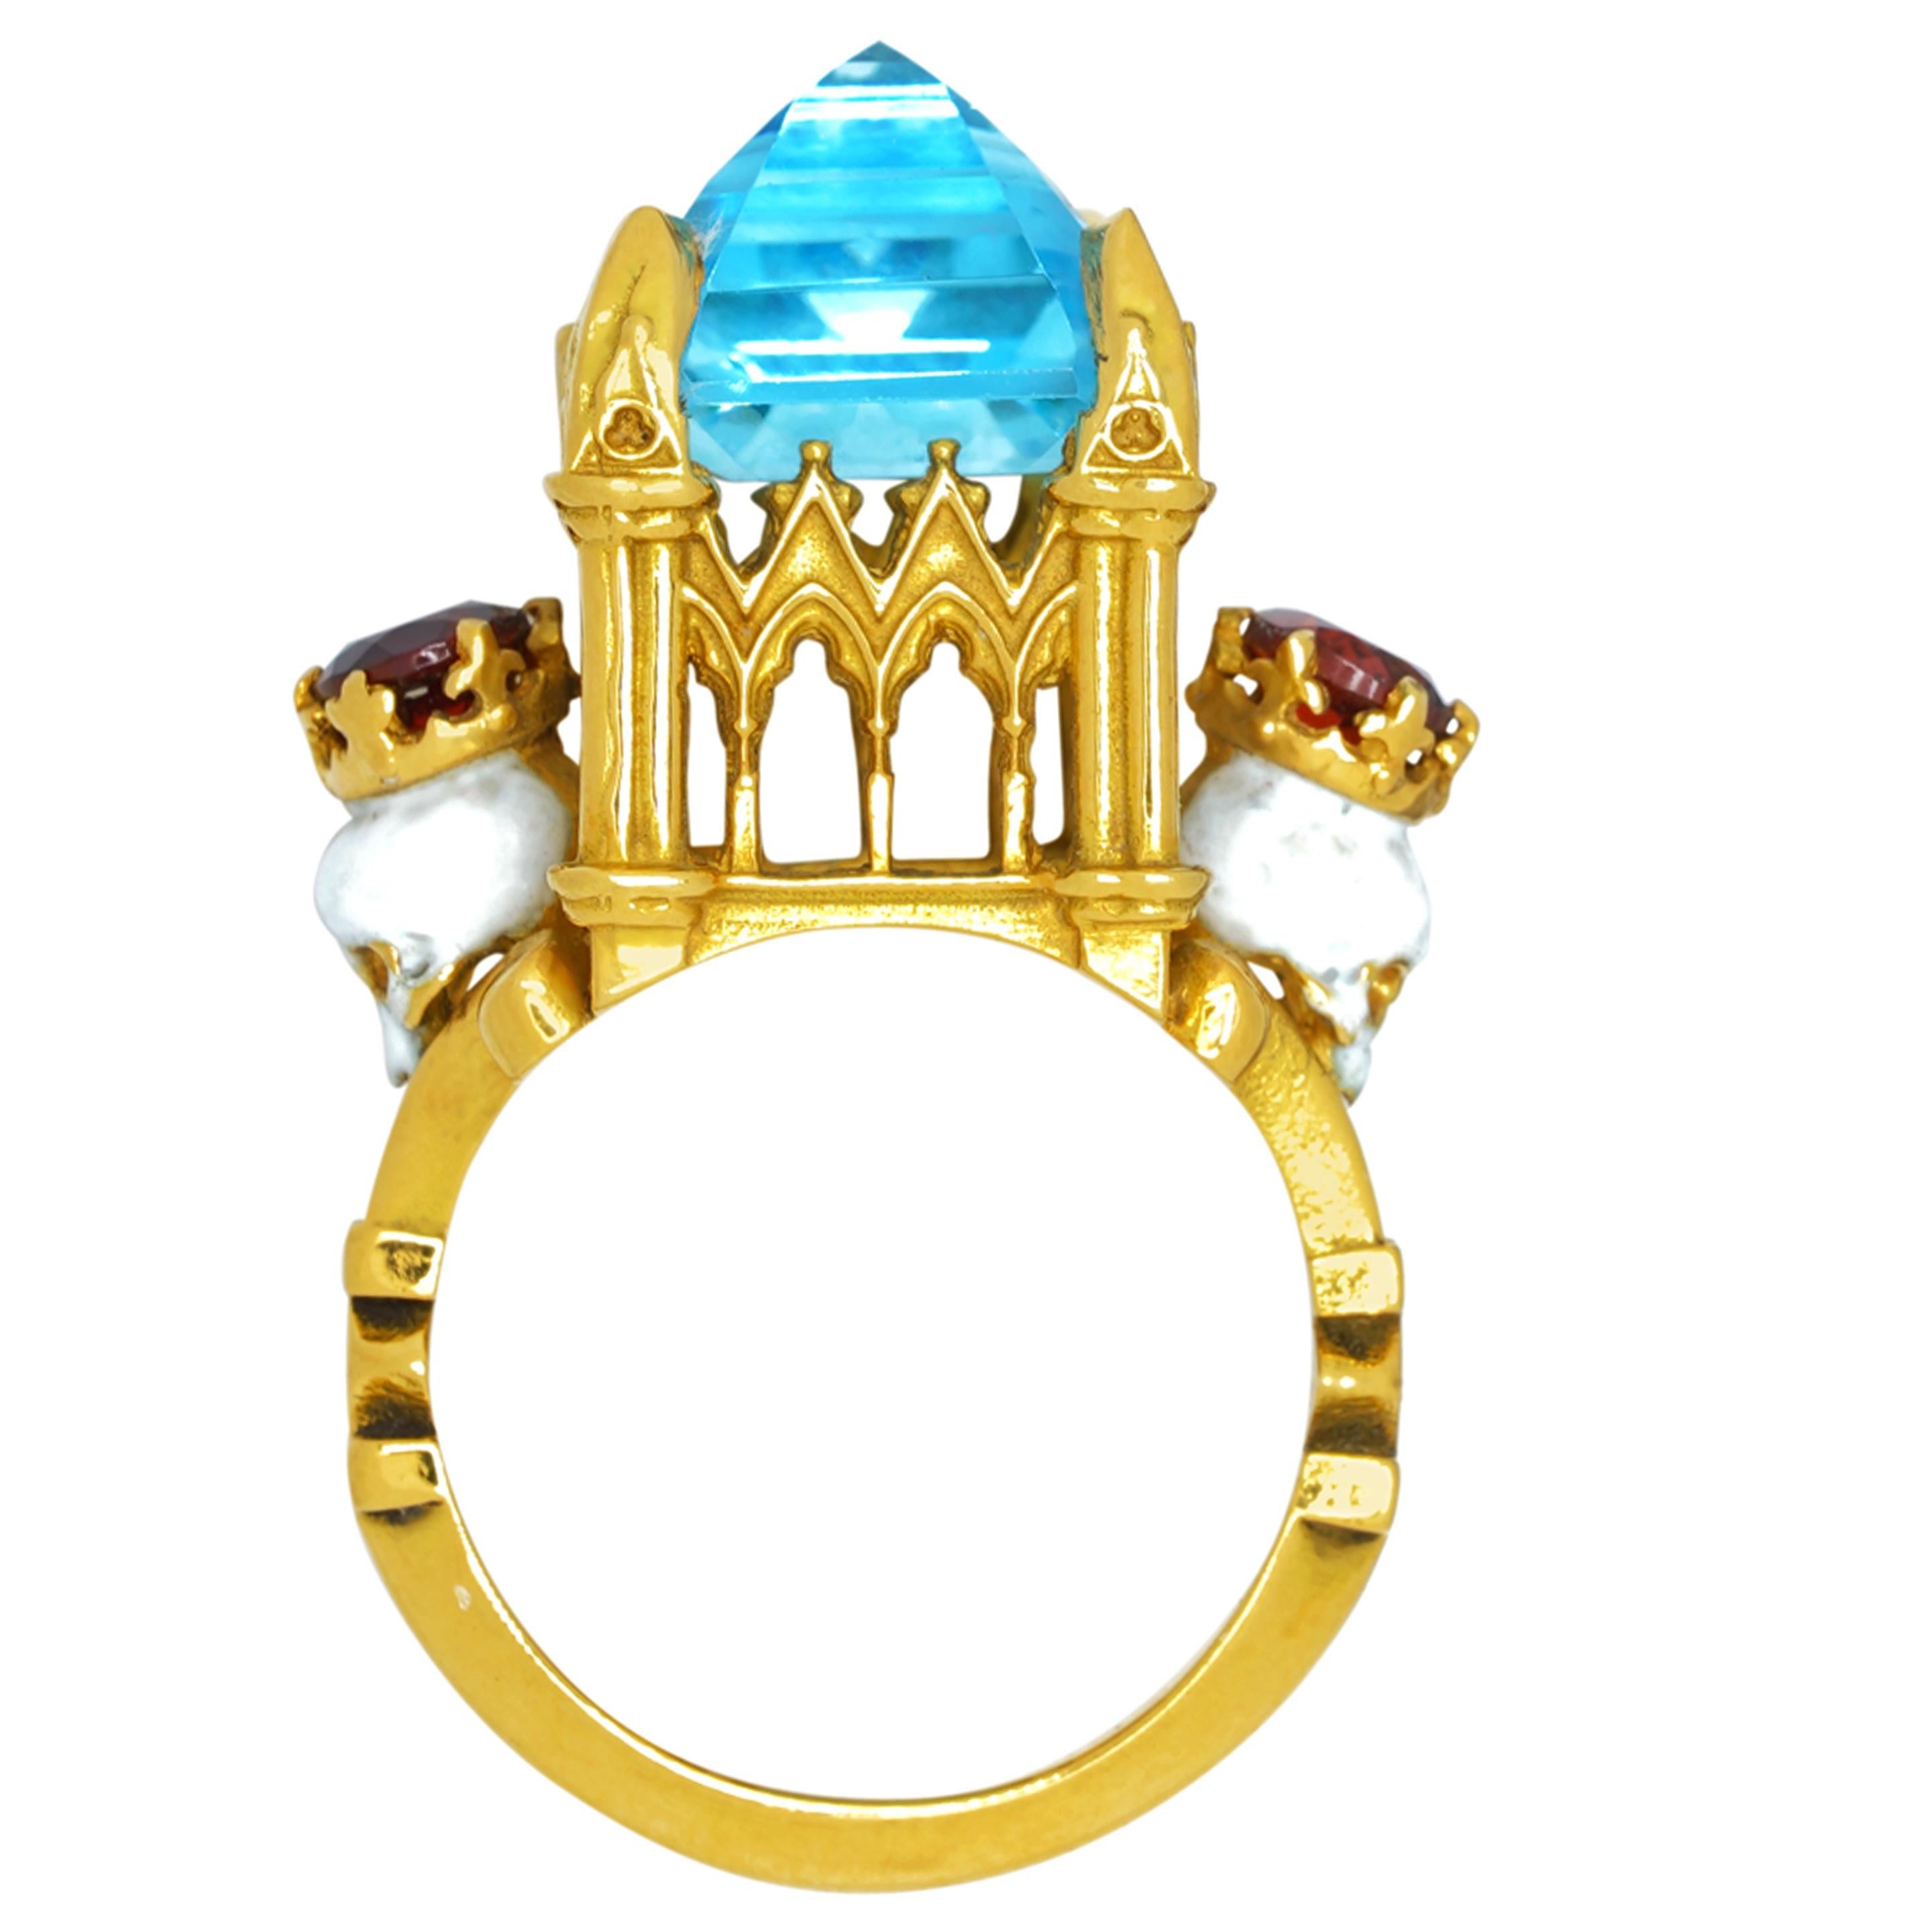 Catacomb Saints Cathedral Ring in 18 Karat Yellow Gold with Topaz and Garnets For Sale 2